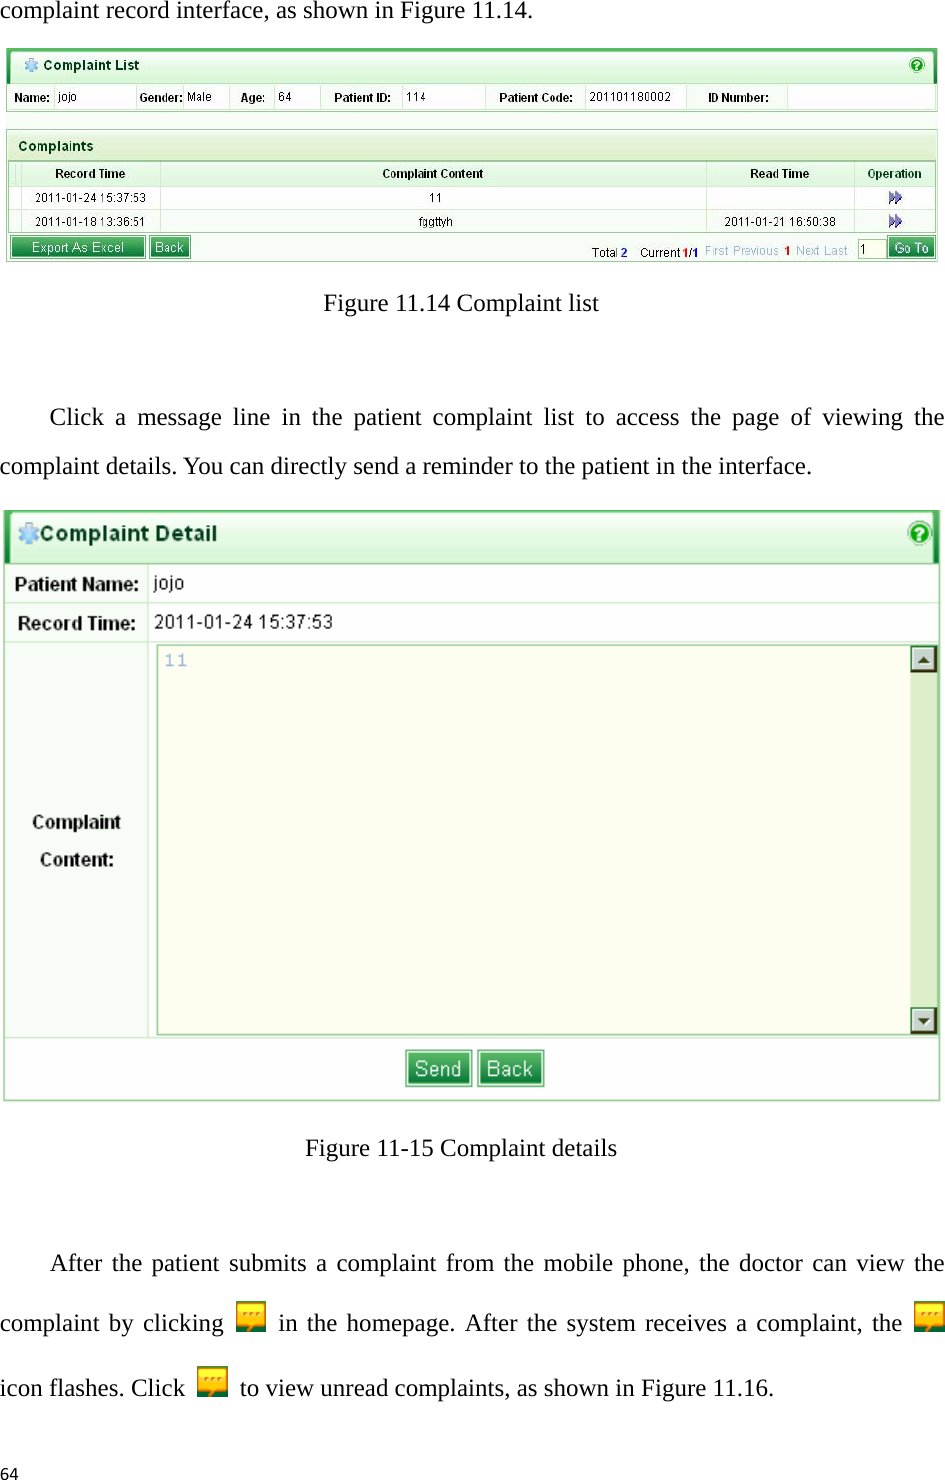 64complaint record interface, as shown in Figure 11.14.    Figure 11.14 Complaint list  Click a message line in the patient complaint list to access the page of viewing the complaint details. You can directly send a reminder to the patient in the interface.    Figure 11-15 Complaint details    After the patient submits a complaint from the mobile phone, the doctor can view the complaint by clicking   in the homepage. After the system receives a complaint, the   icon flashes. Click    to view unread complaints, as shown in Figure 11.16.   